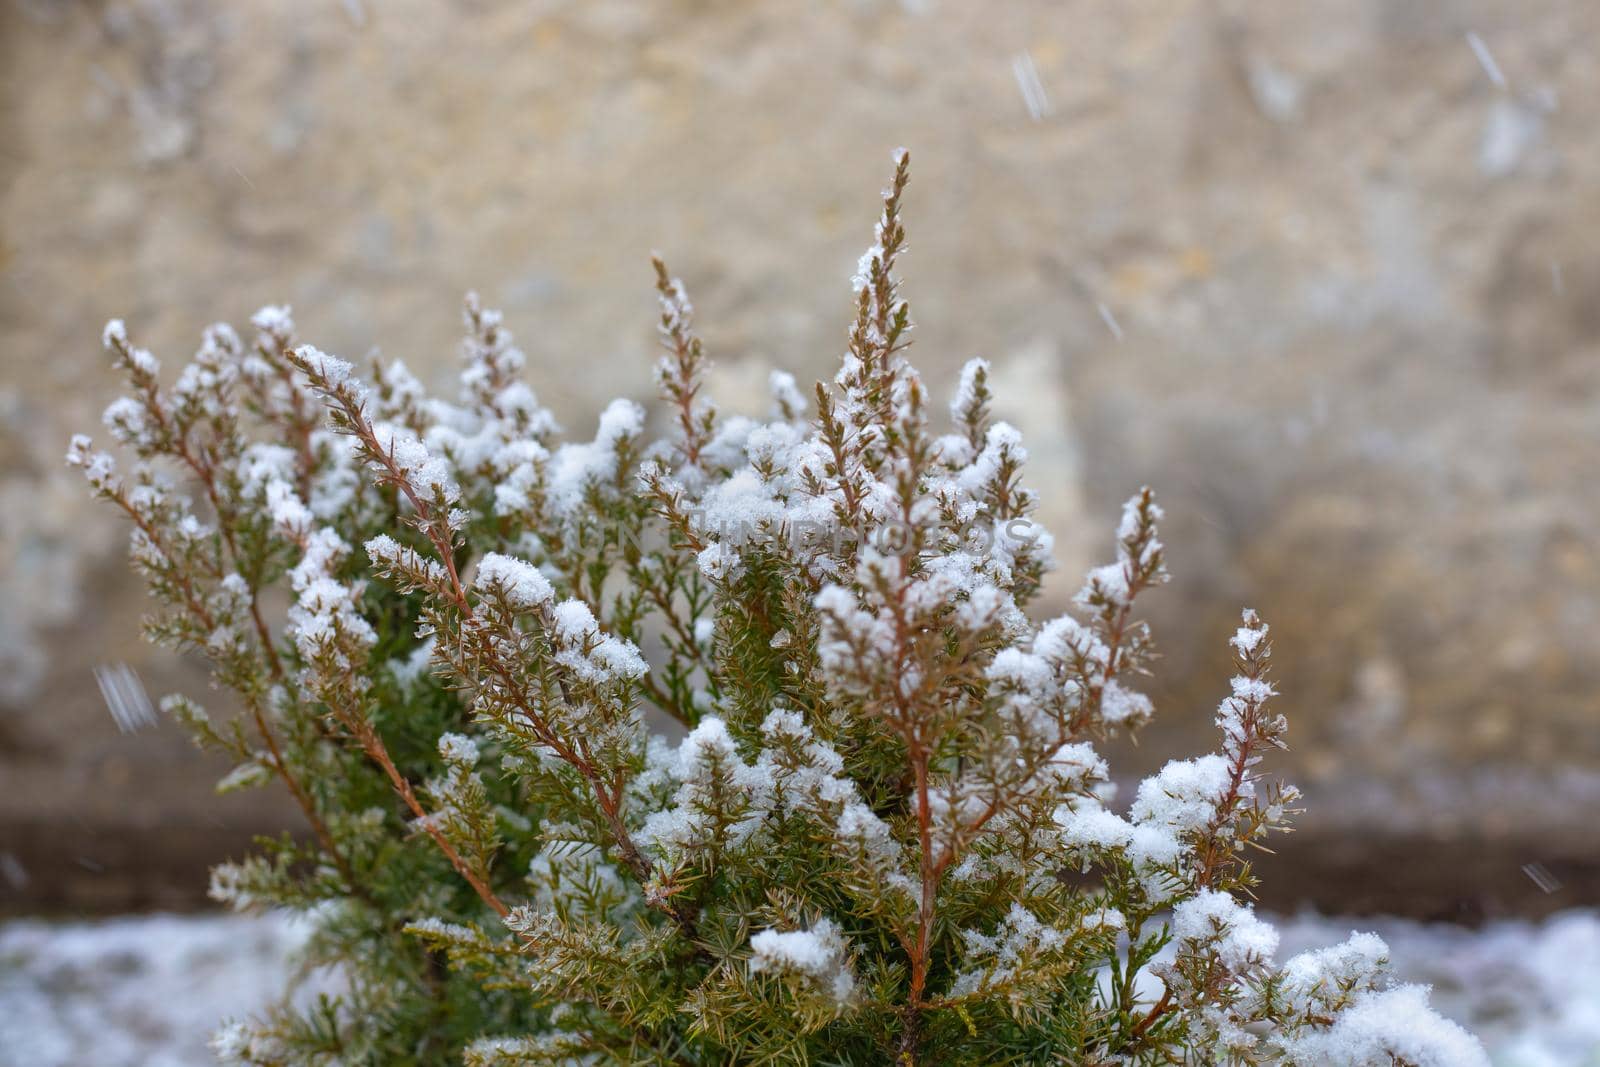 Juniper bush in the garden in winter under the snow. The onset of cold weather by levnat09